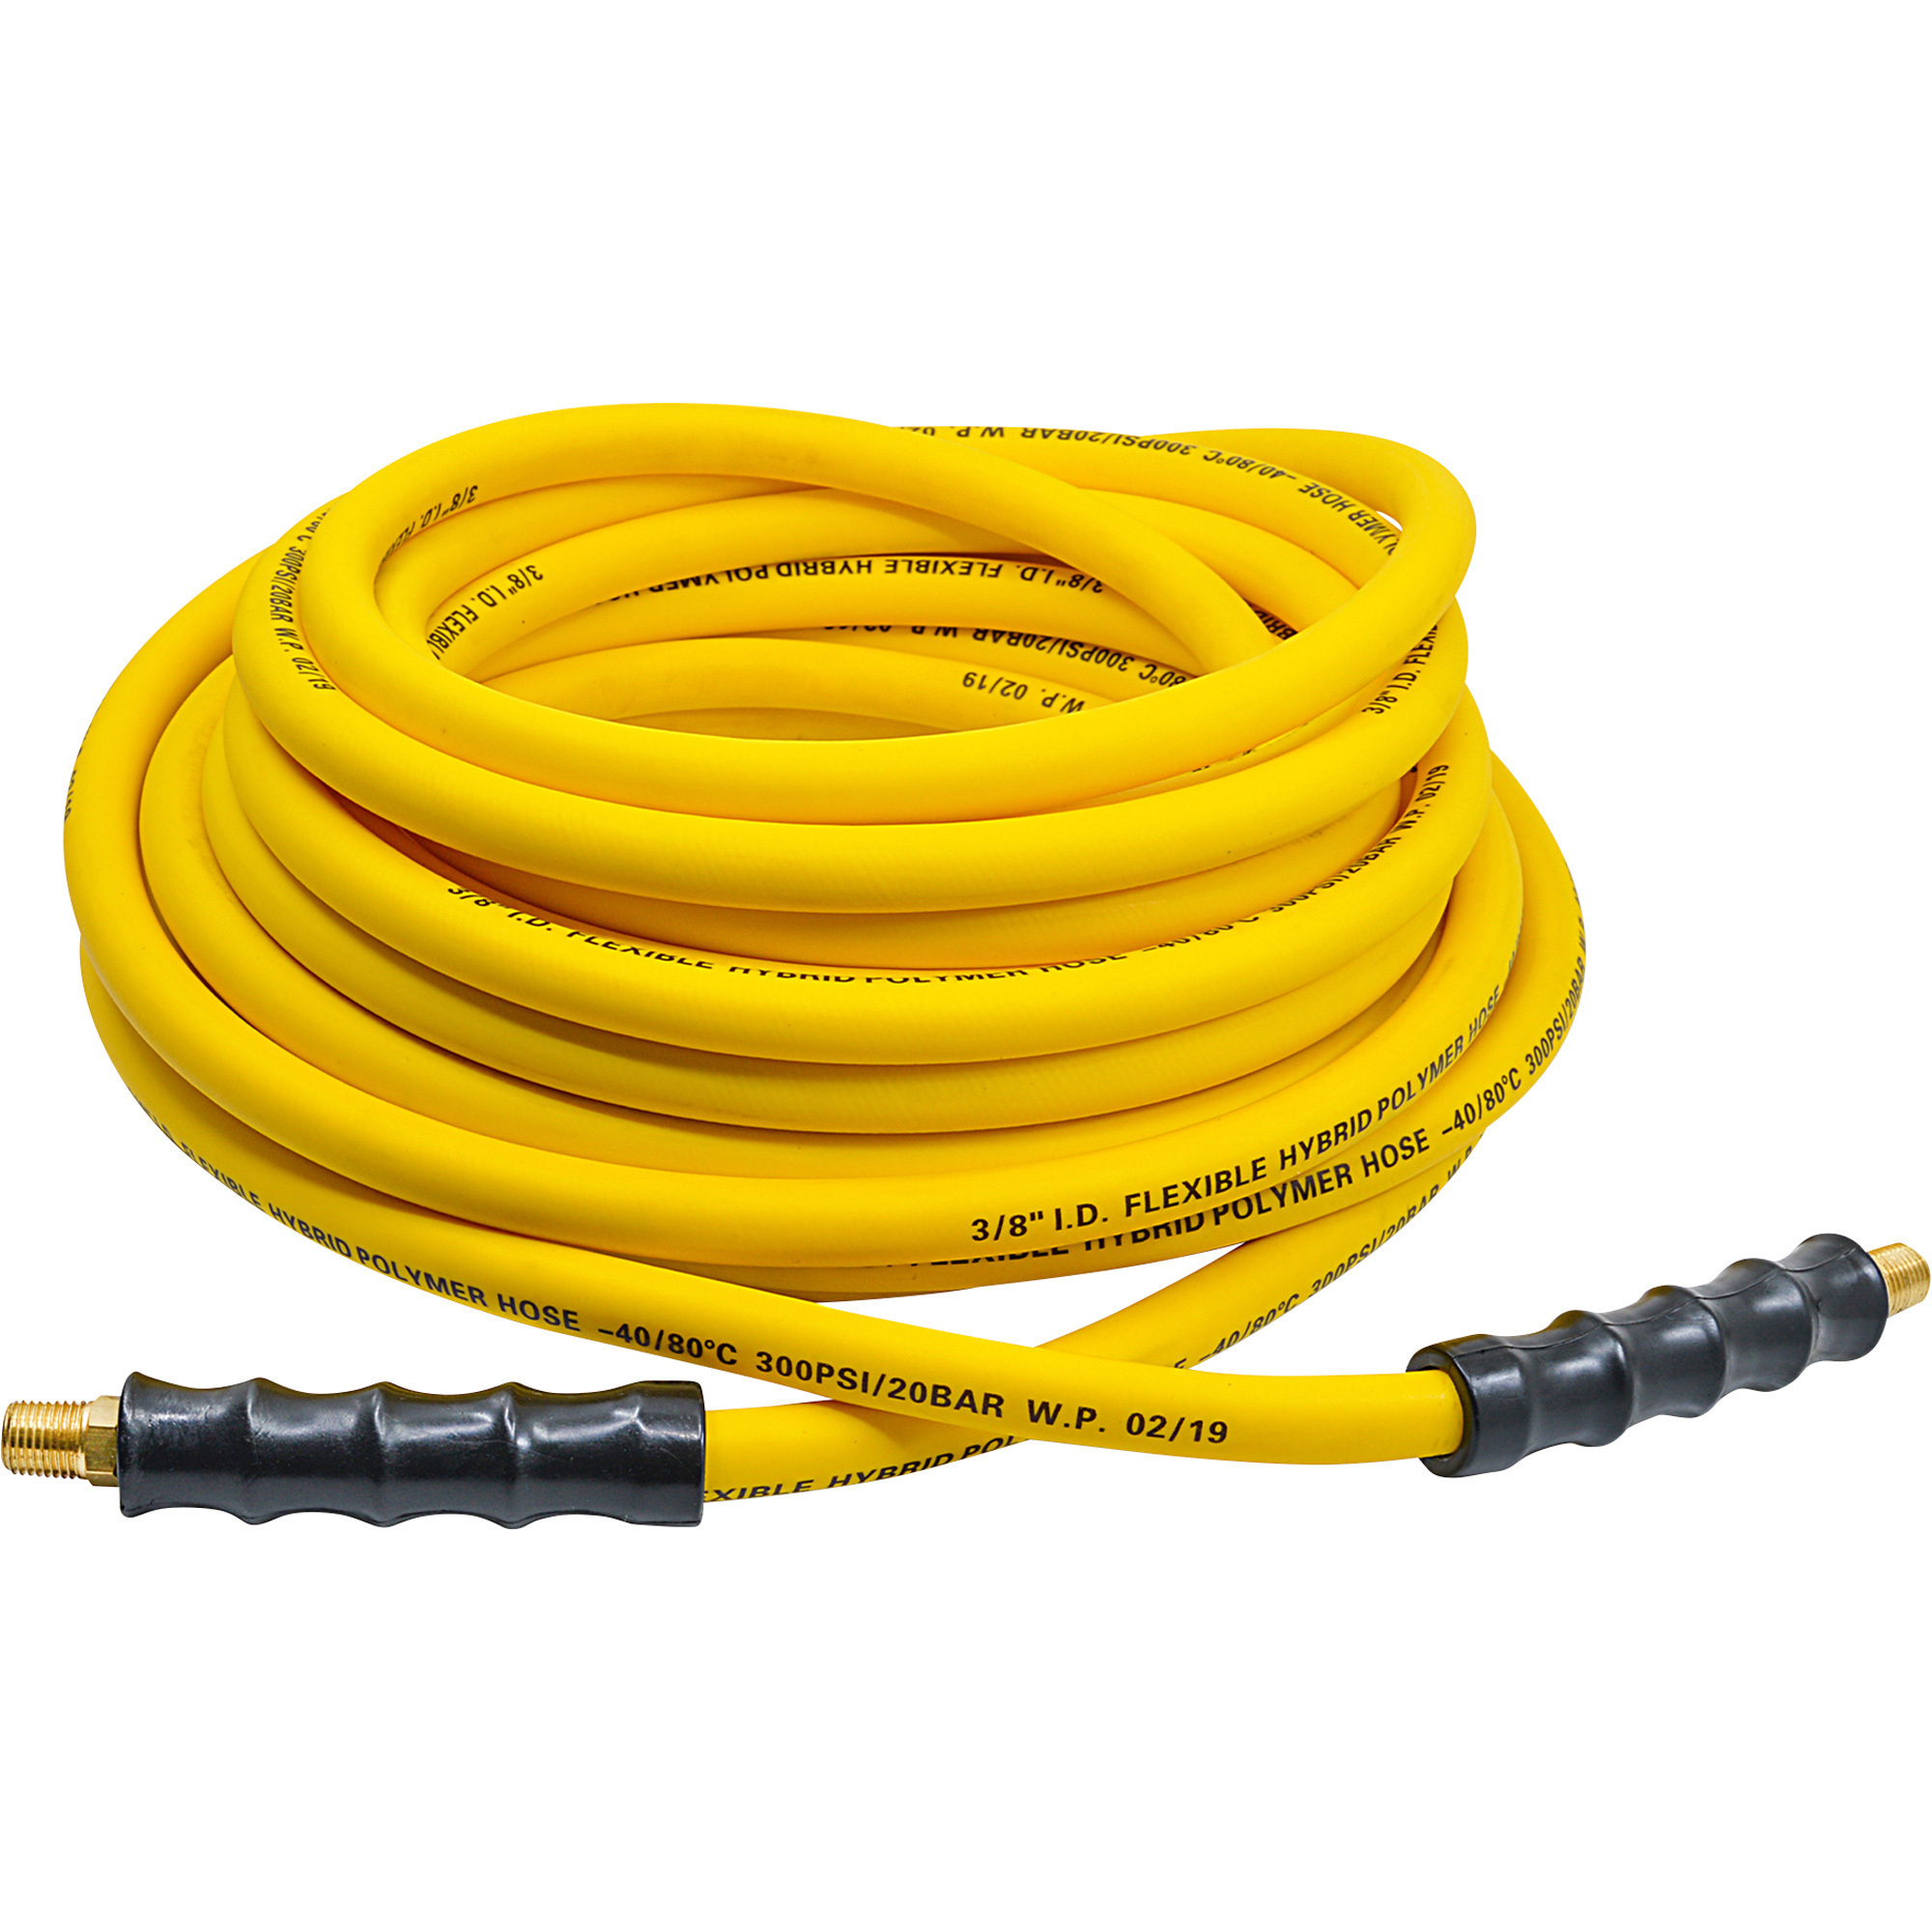 Klutch Professional Whip Hose, 1/2in. x 5ft., 300 PSI, Model